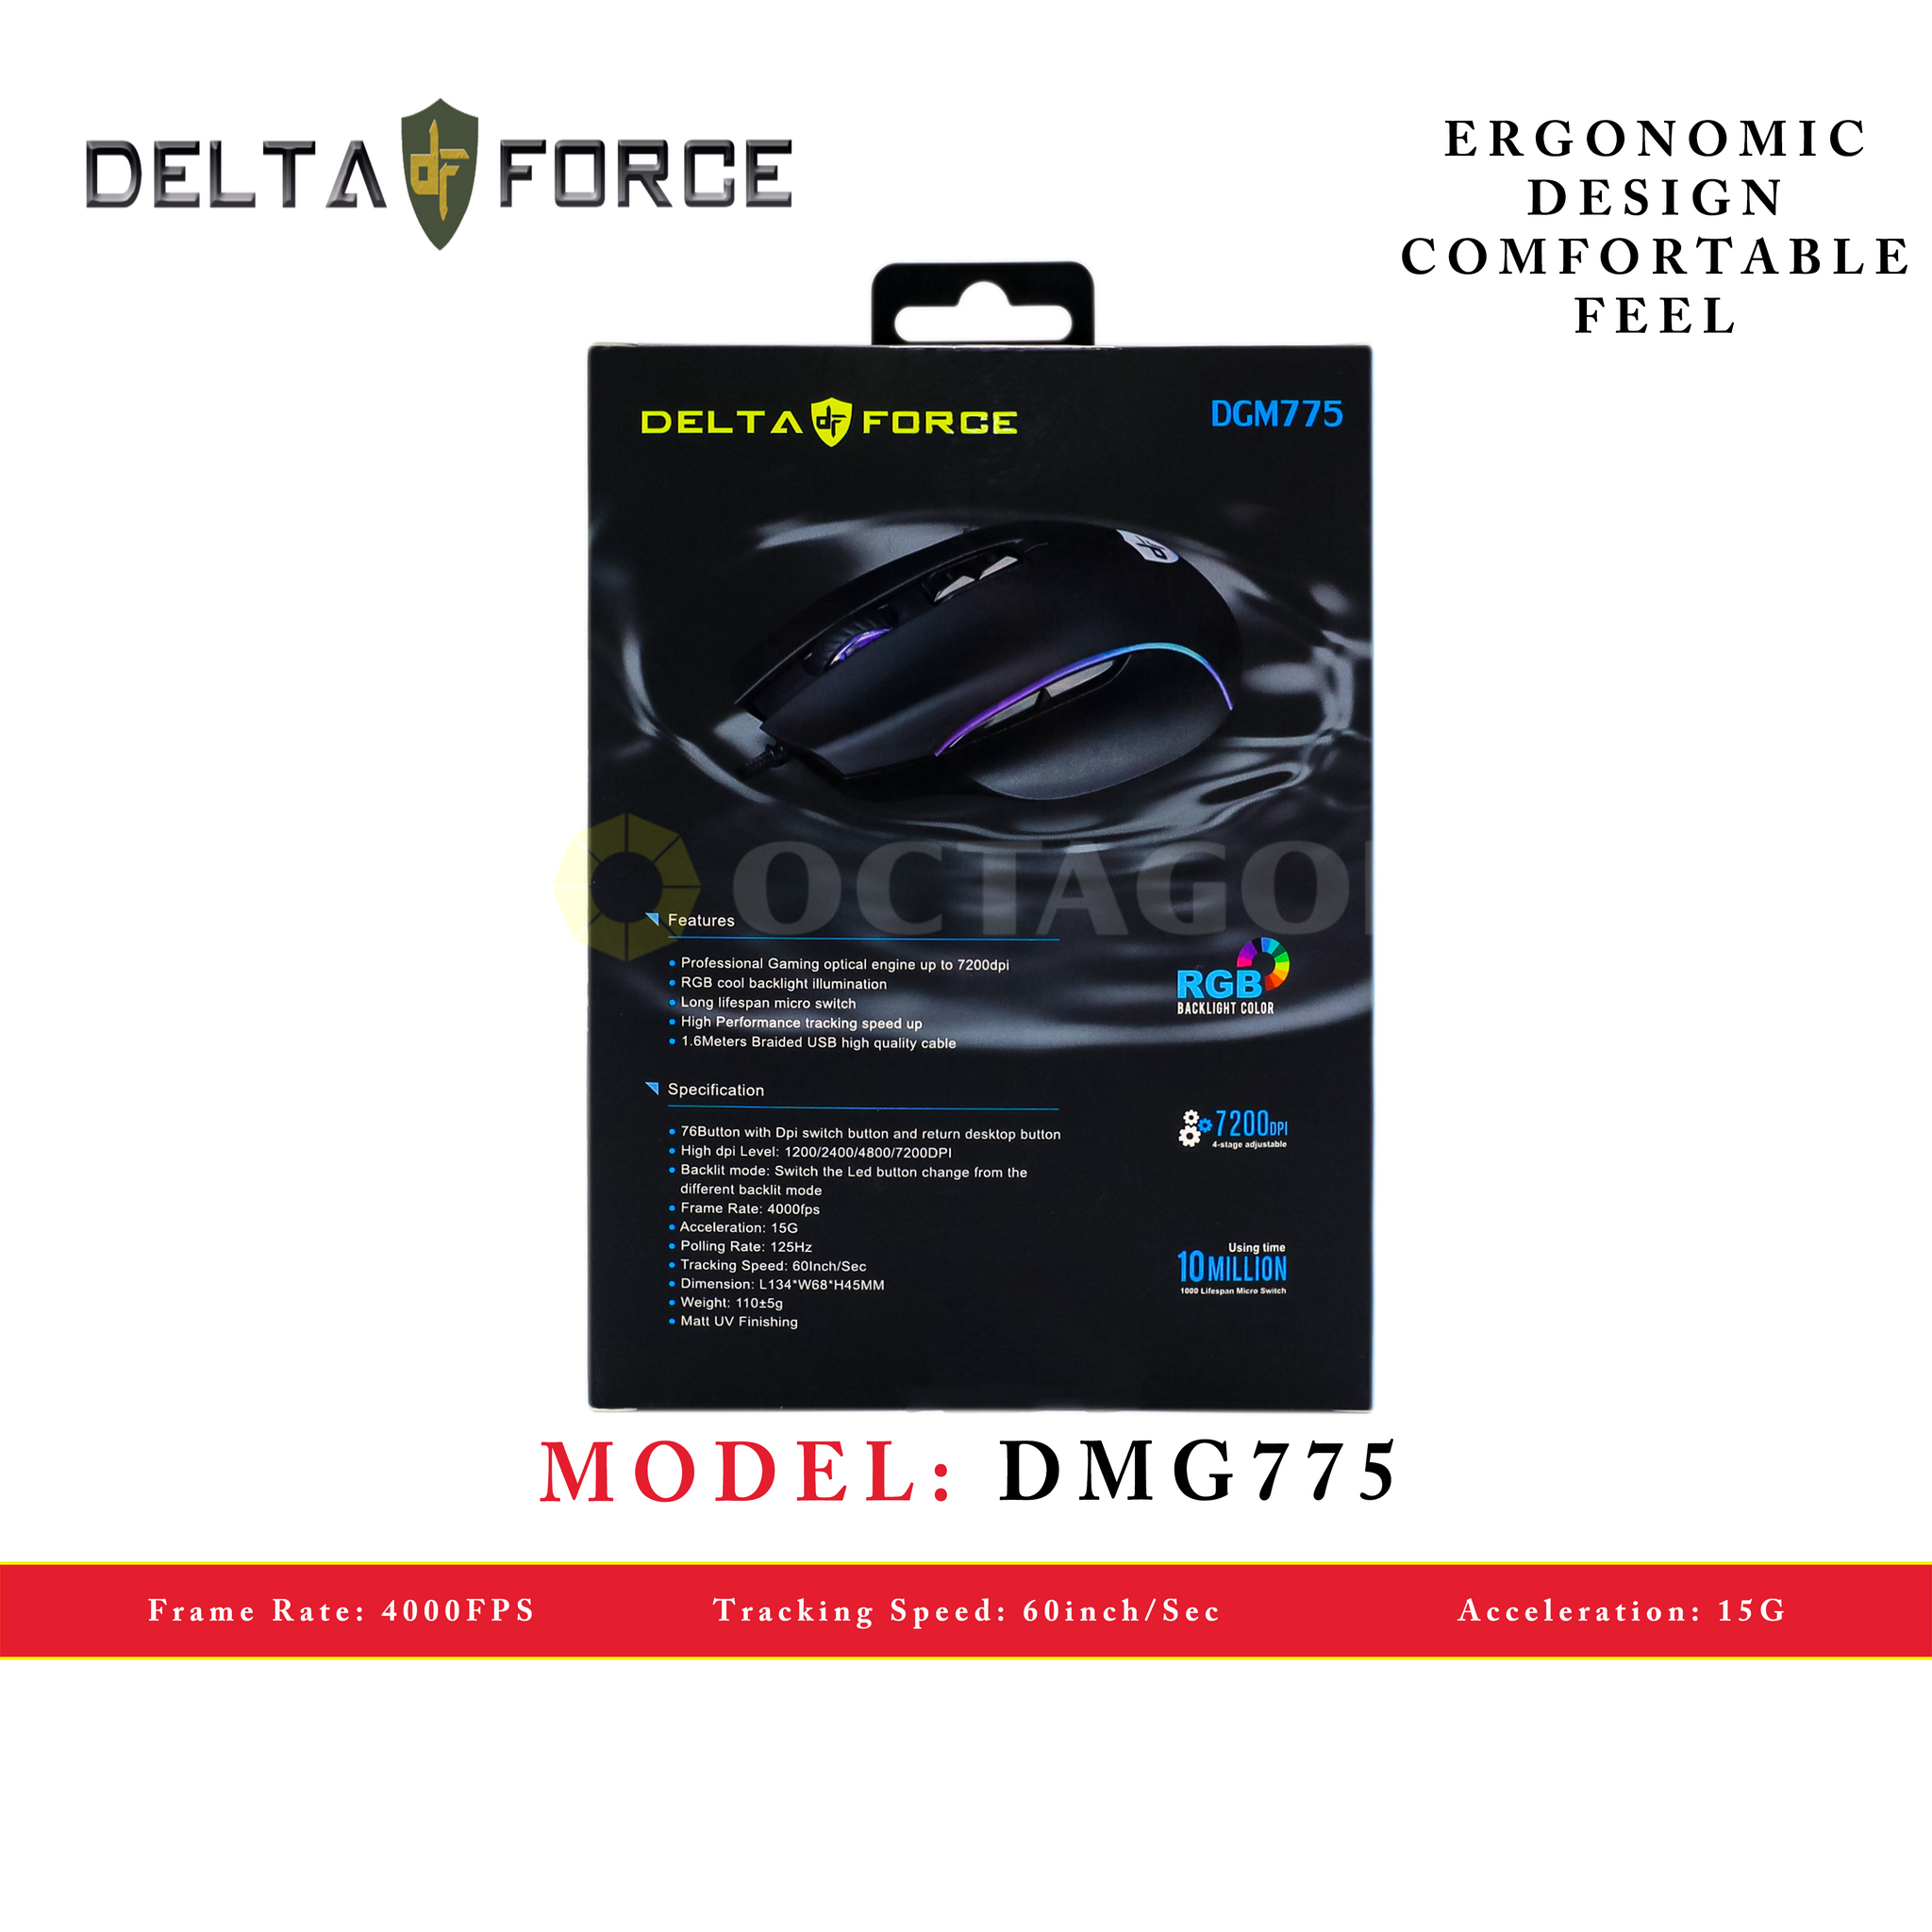 DELTA FORCE DGM775 USB GAMING MOUSE 7200